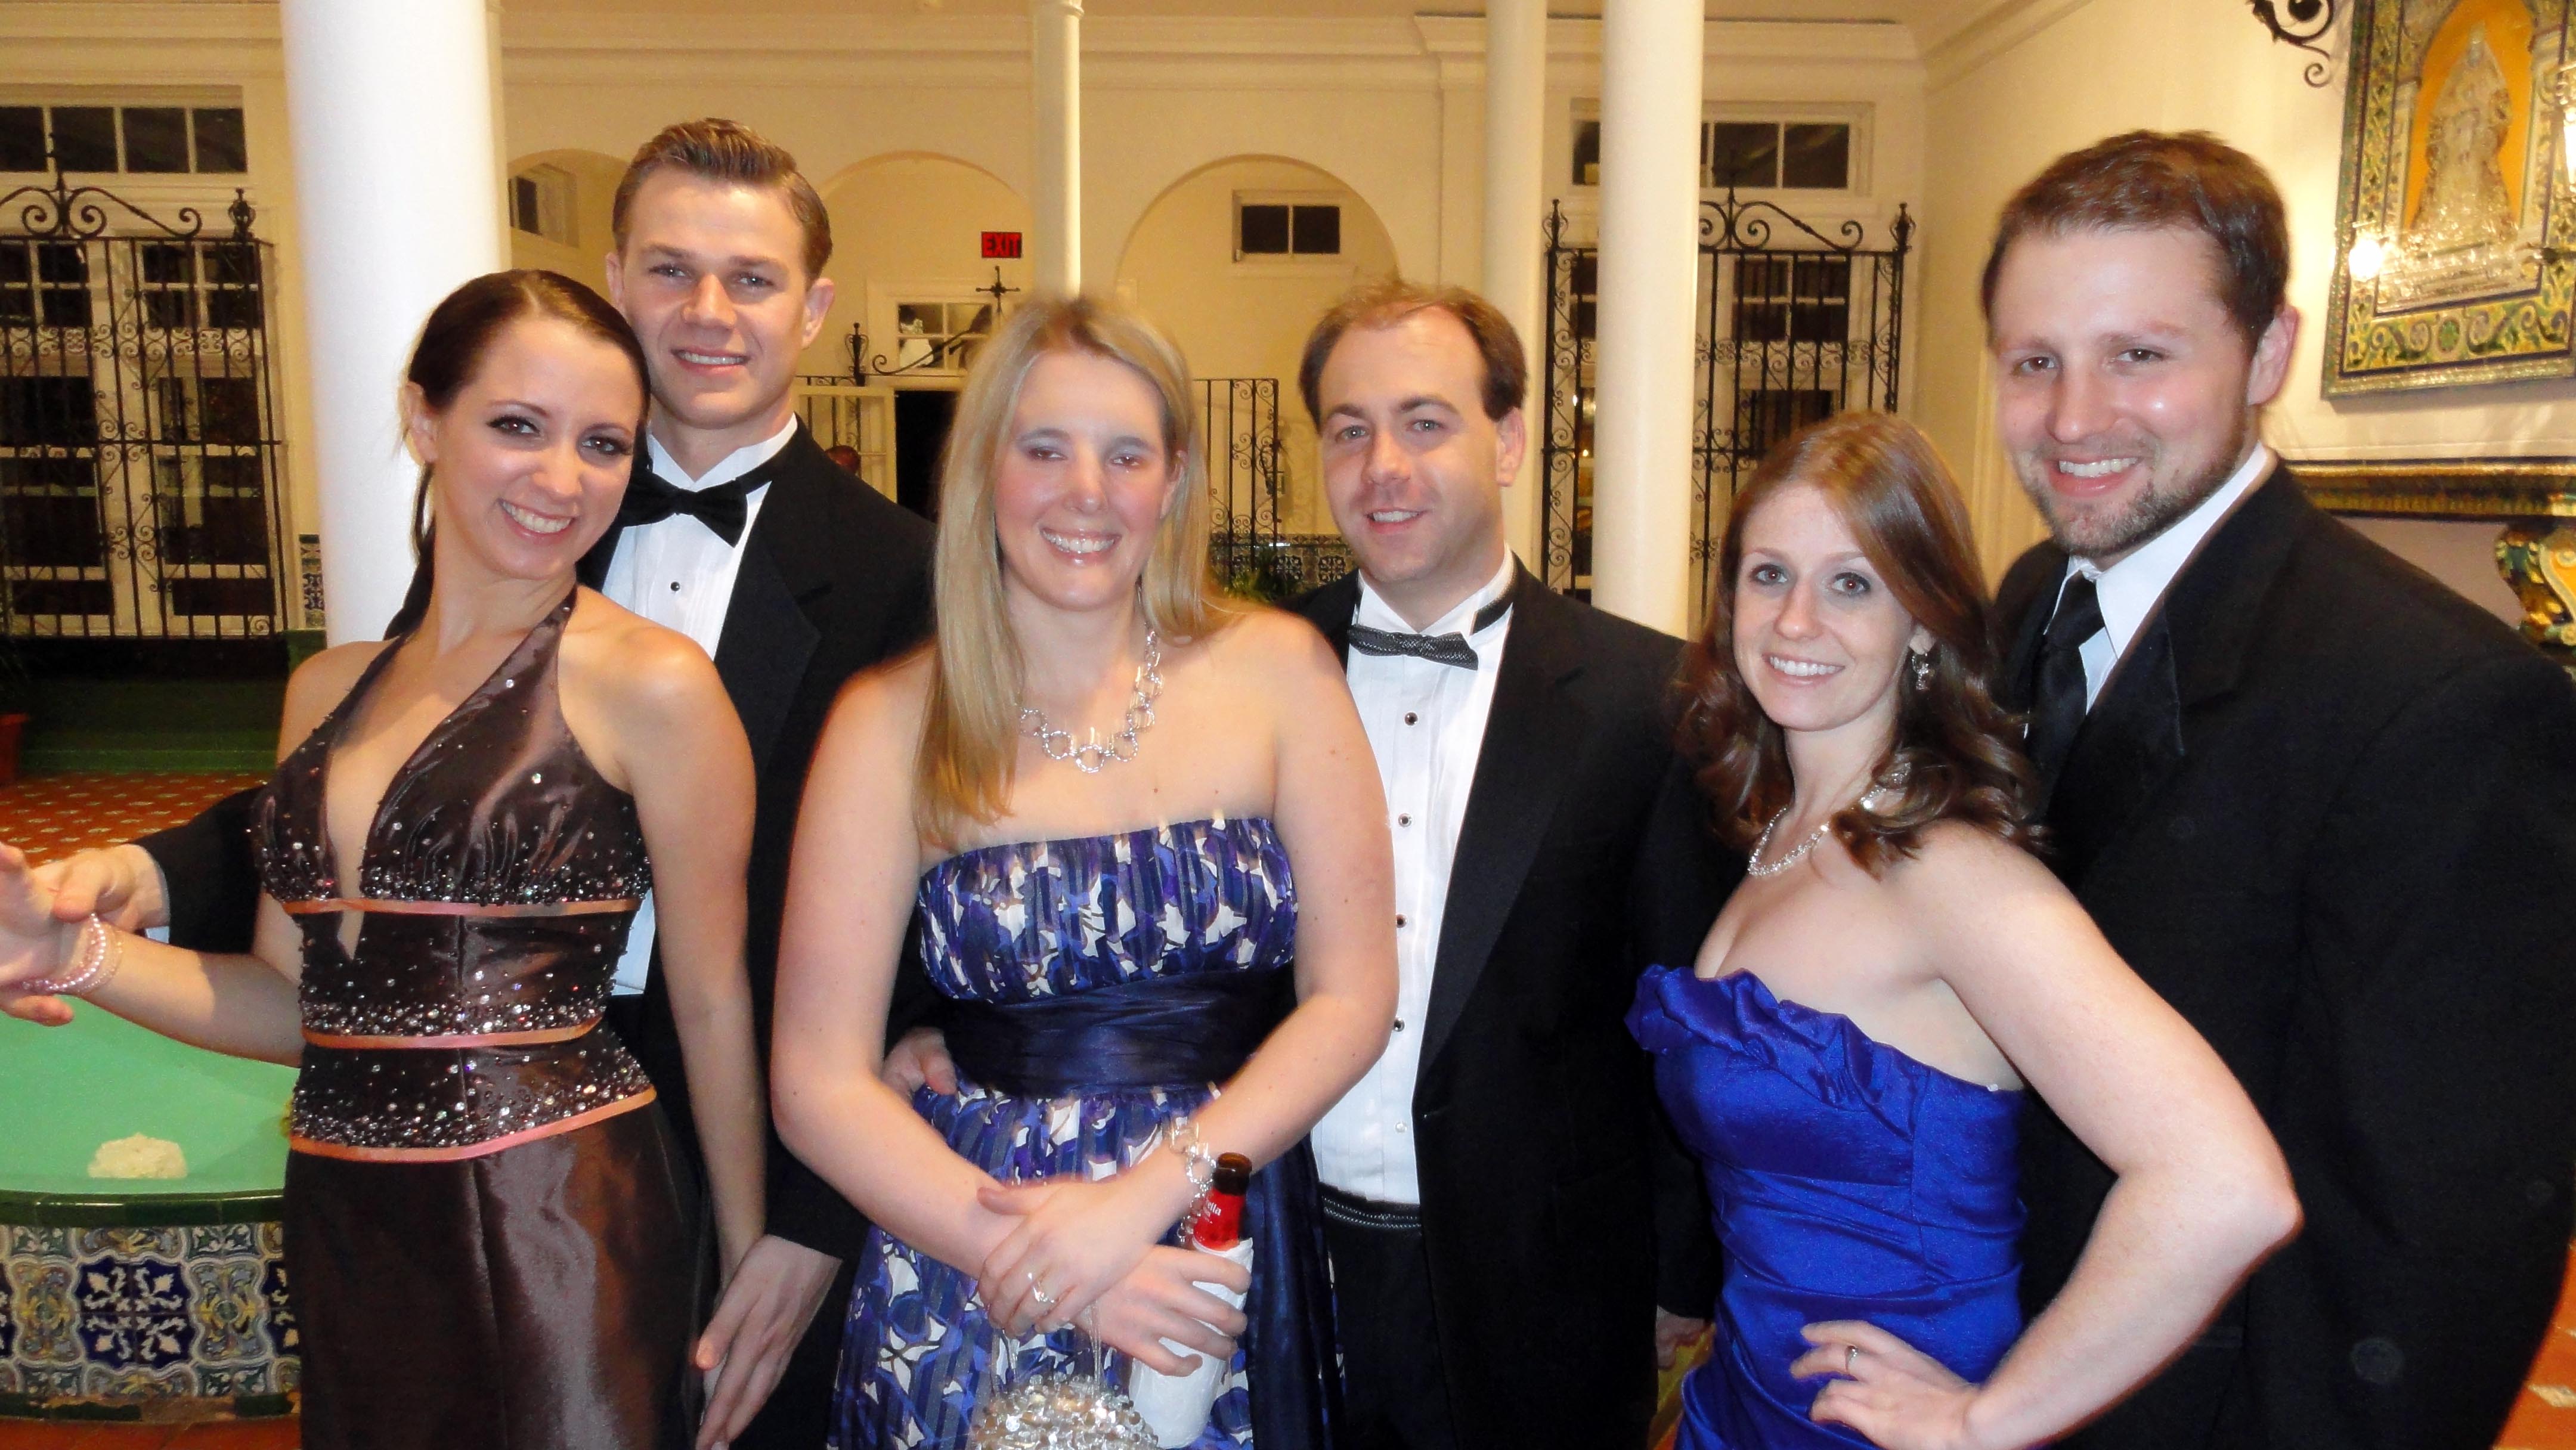 Black Tie Gala at the Embassy of Spain (Former Ambassador’s Residence)